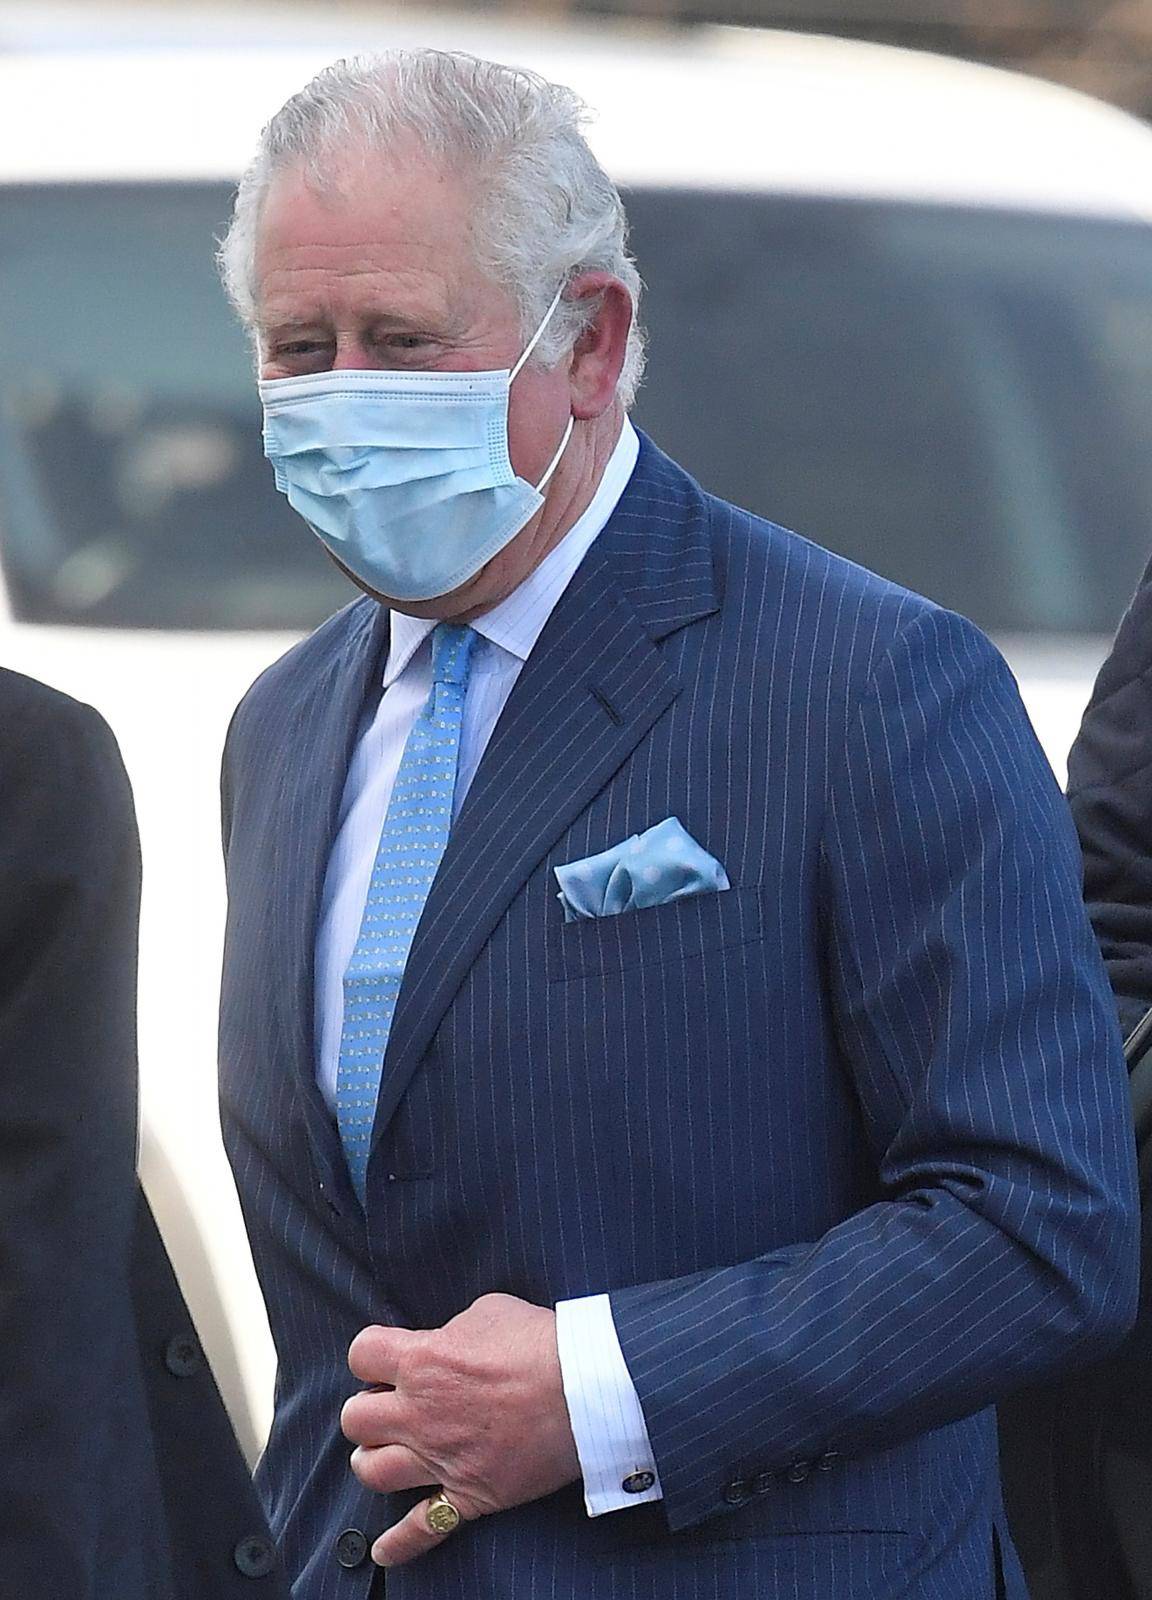 Britain's Prince Charles visits NHS COVID-19 vaccine pop-up clinic amidst the coronavirus disease (COVID-19) pandemic, London